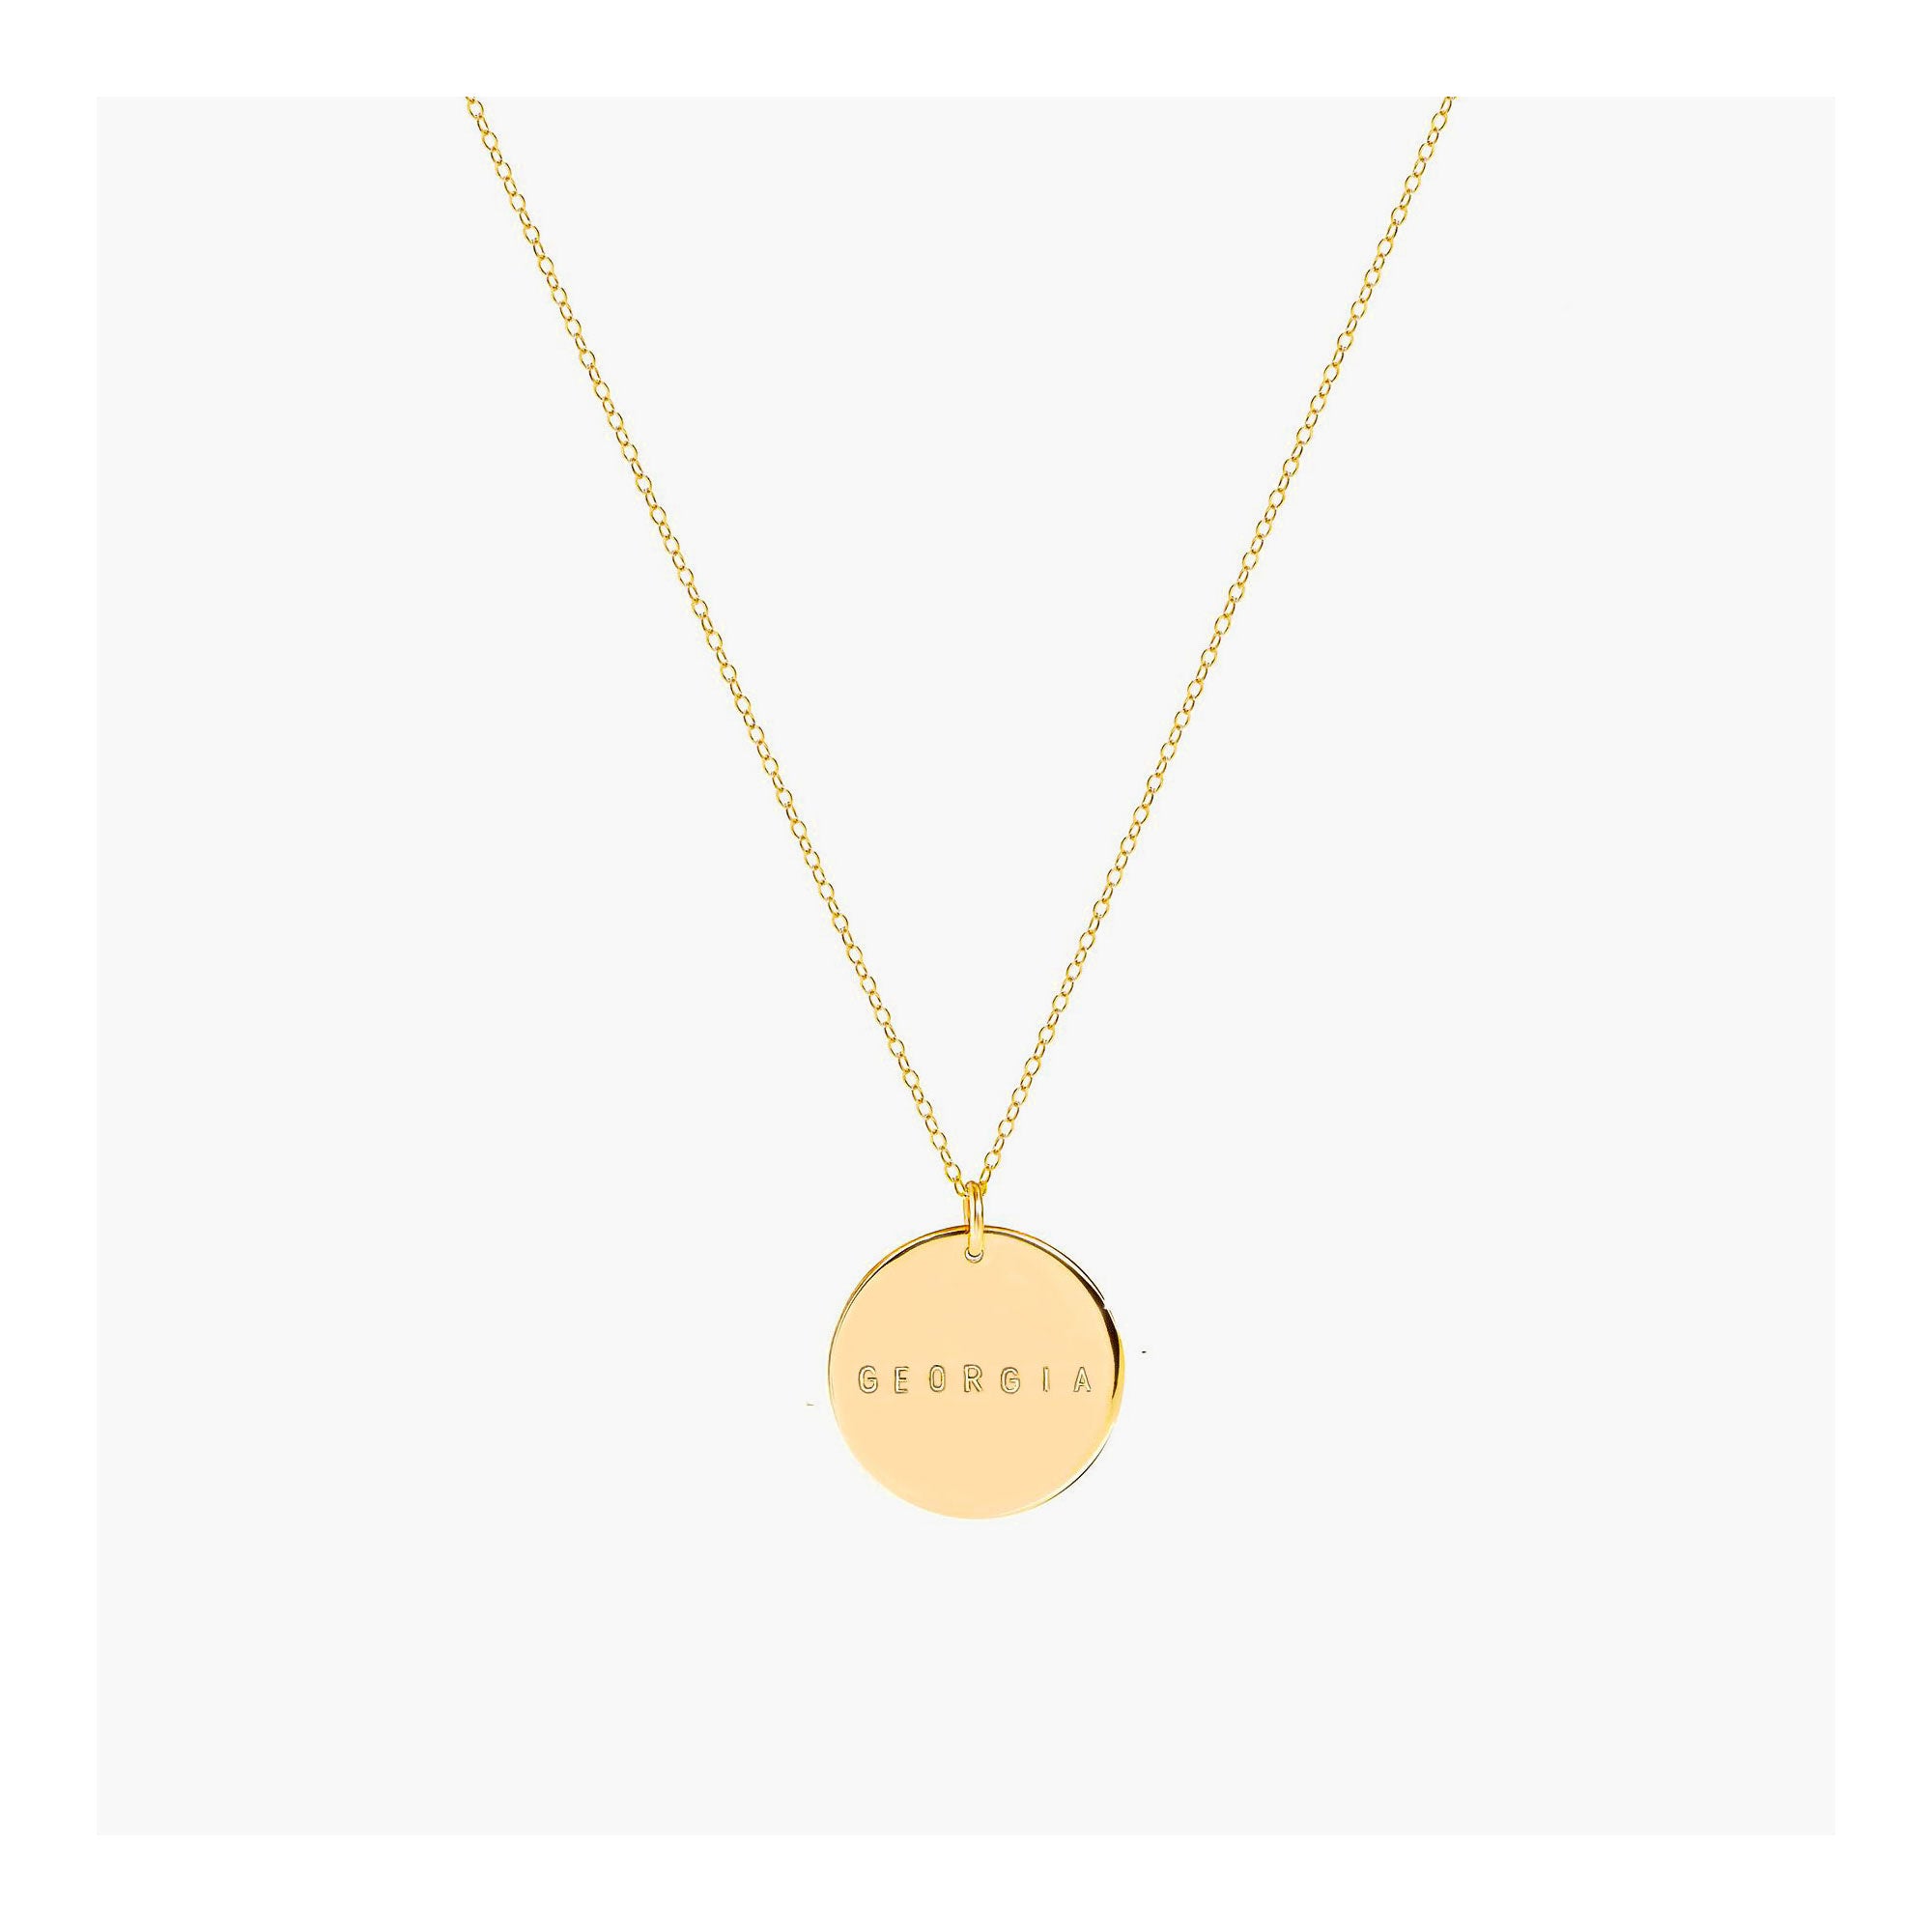 Personalized Pendant Necklace | Gold initial necklace | Engraved pendant necklace